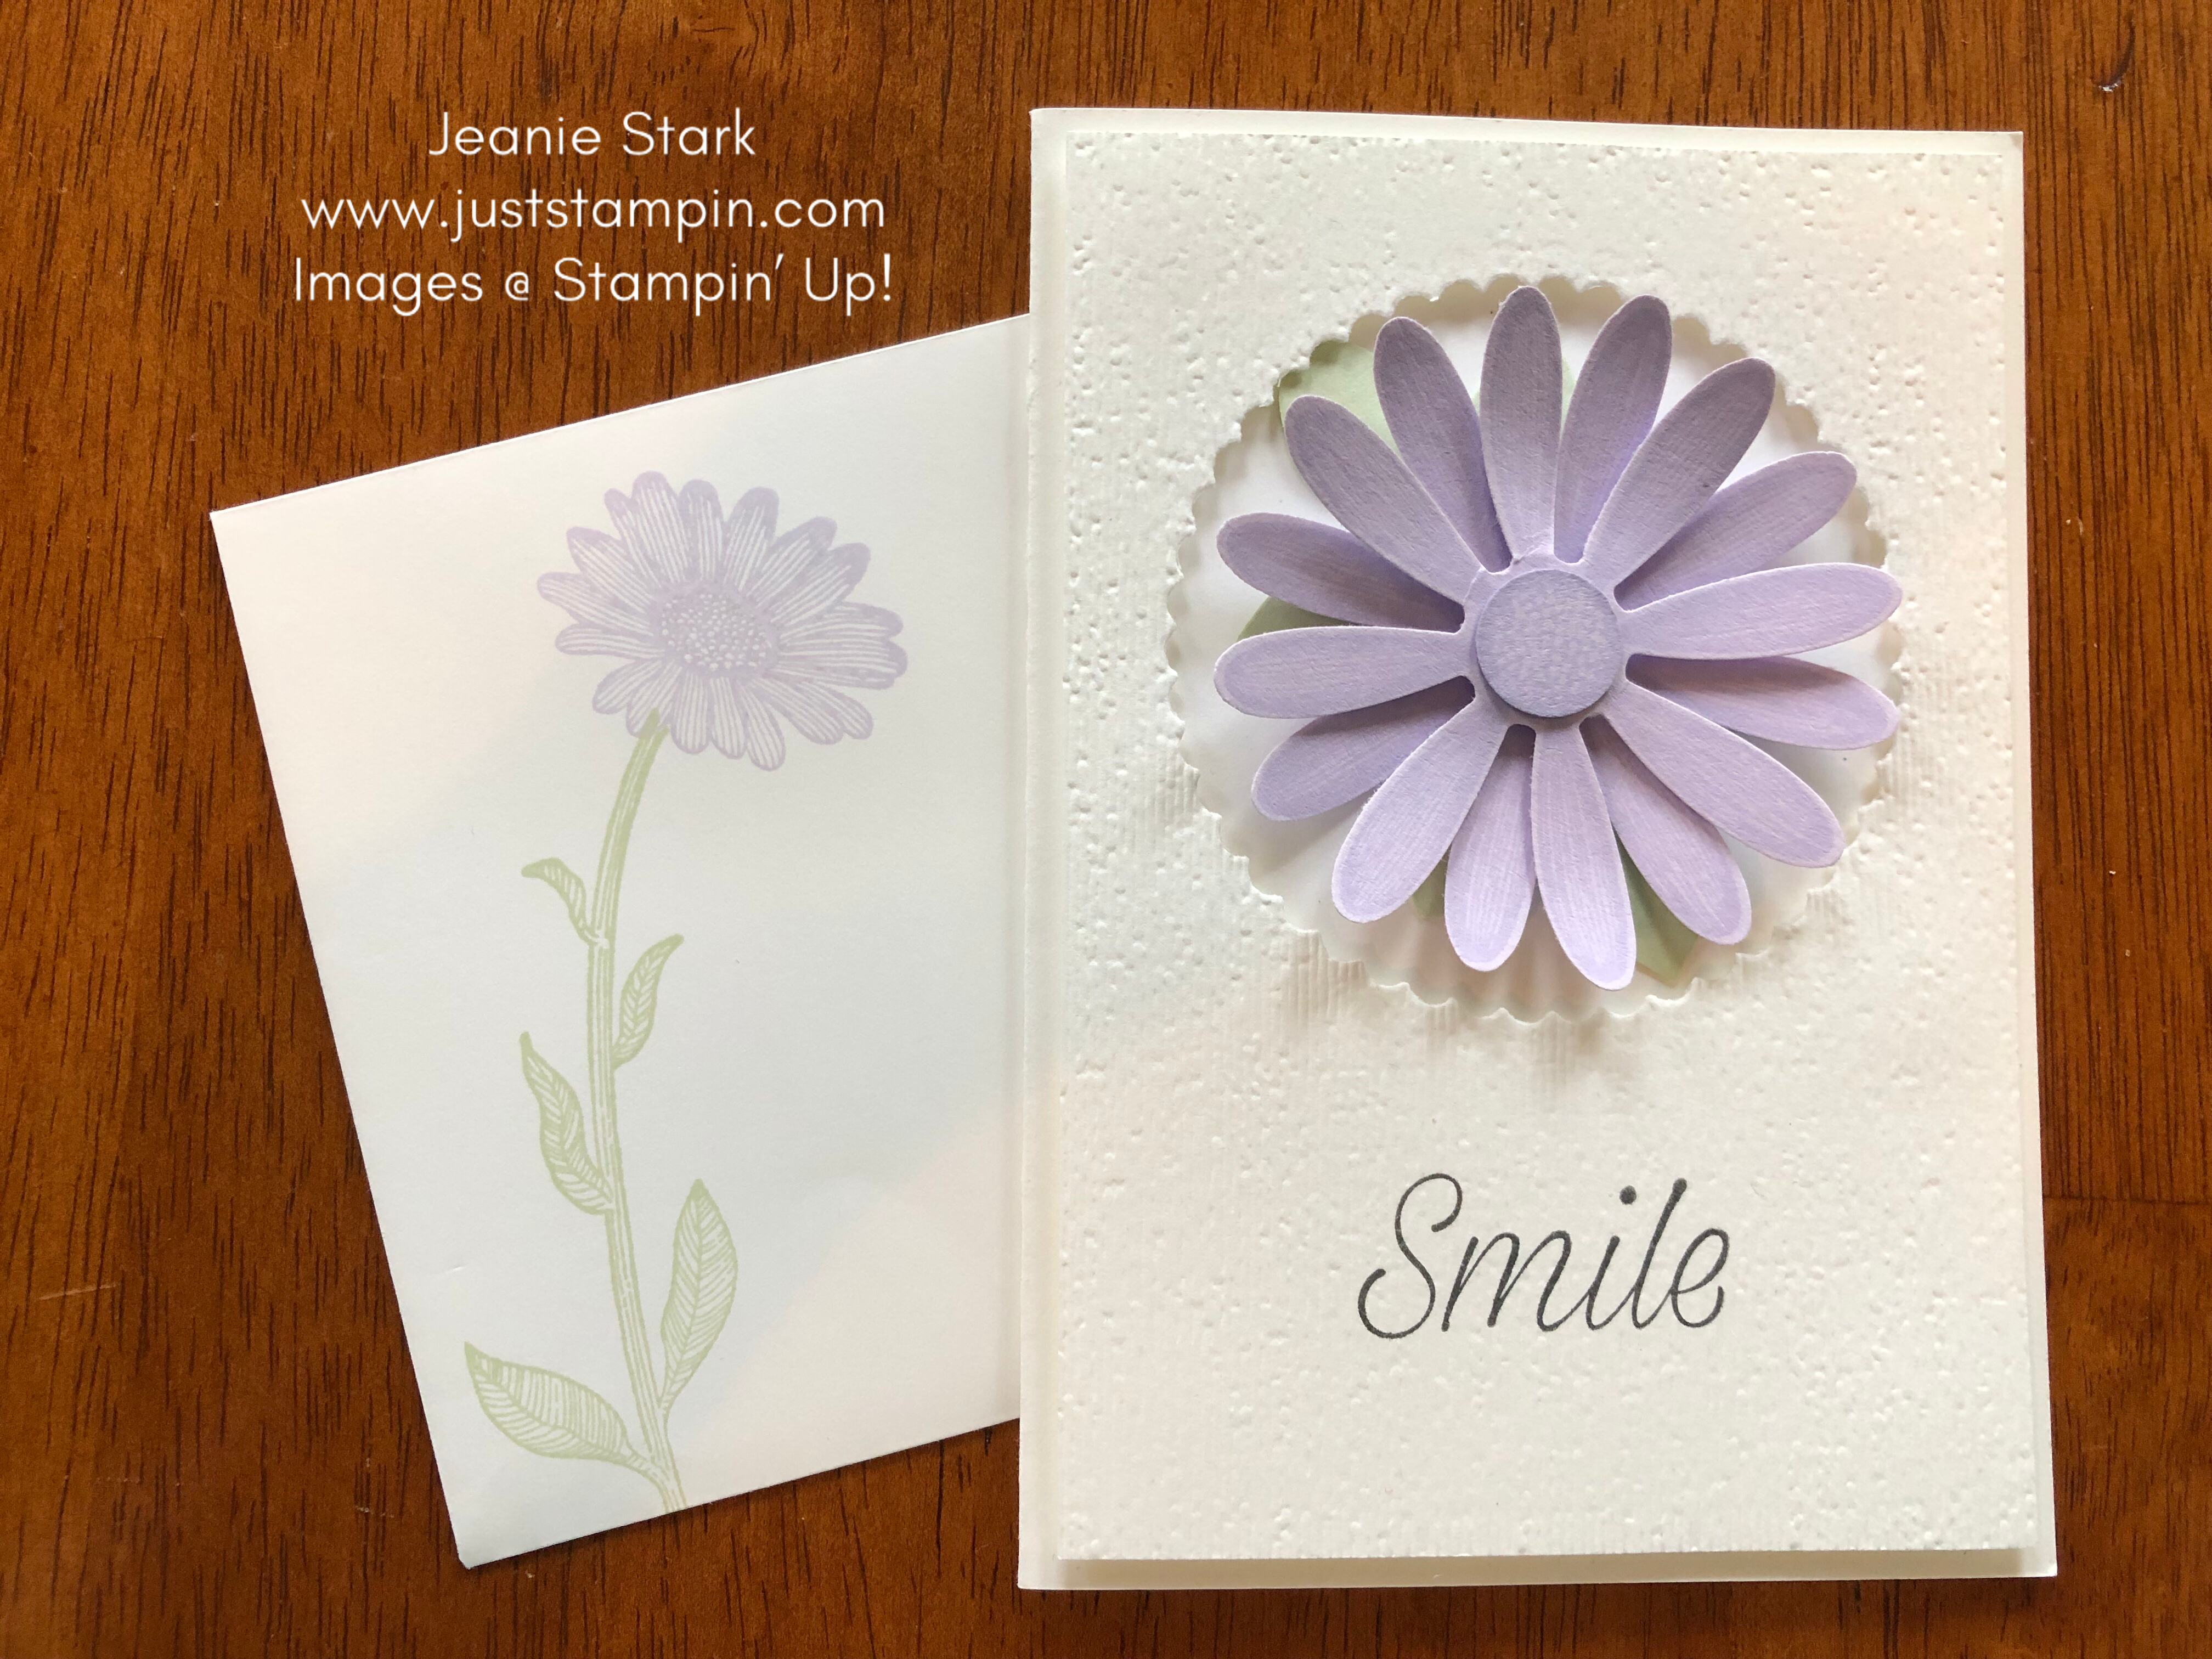 Stampin' Up! Daisy Lane In Color all occasion note card idea - Jeanie Stark StampinUp